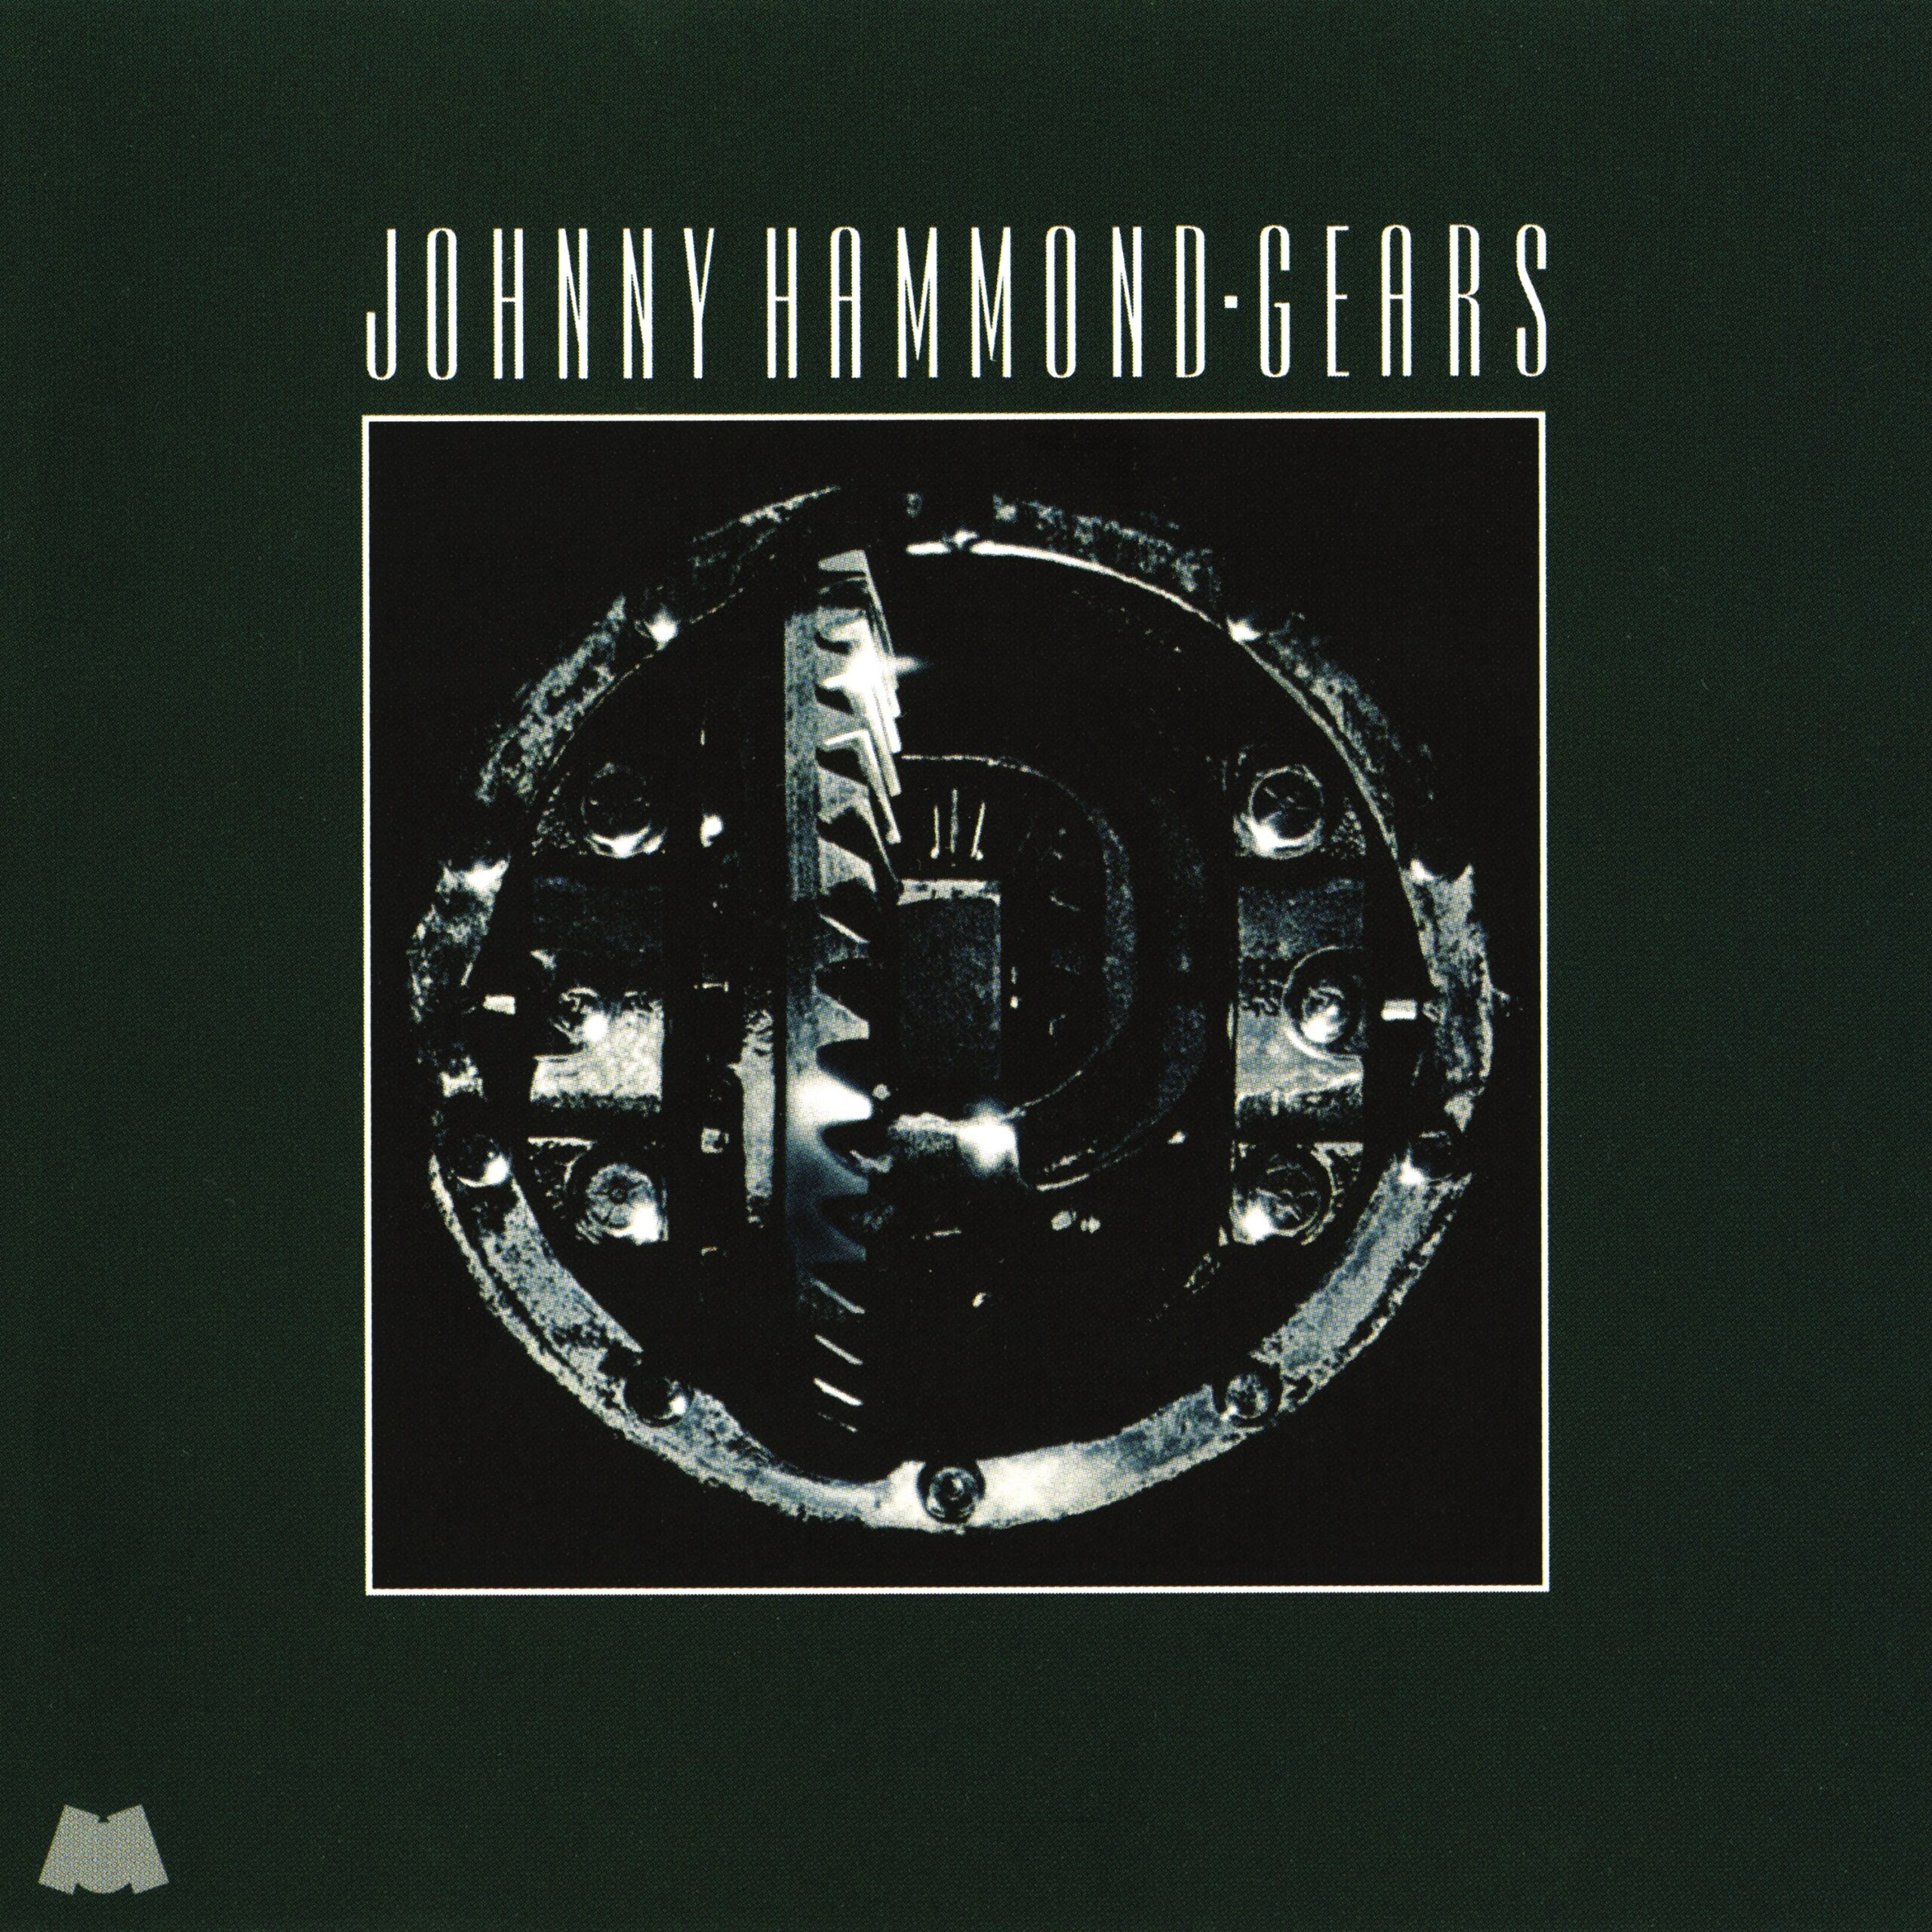 Featured Image for “Johnny Hammond – Gears”